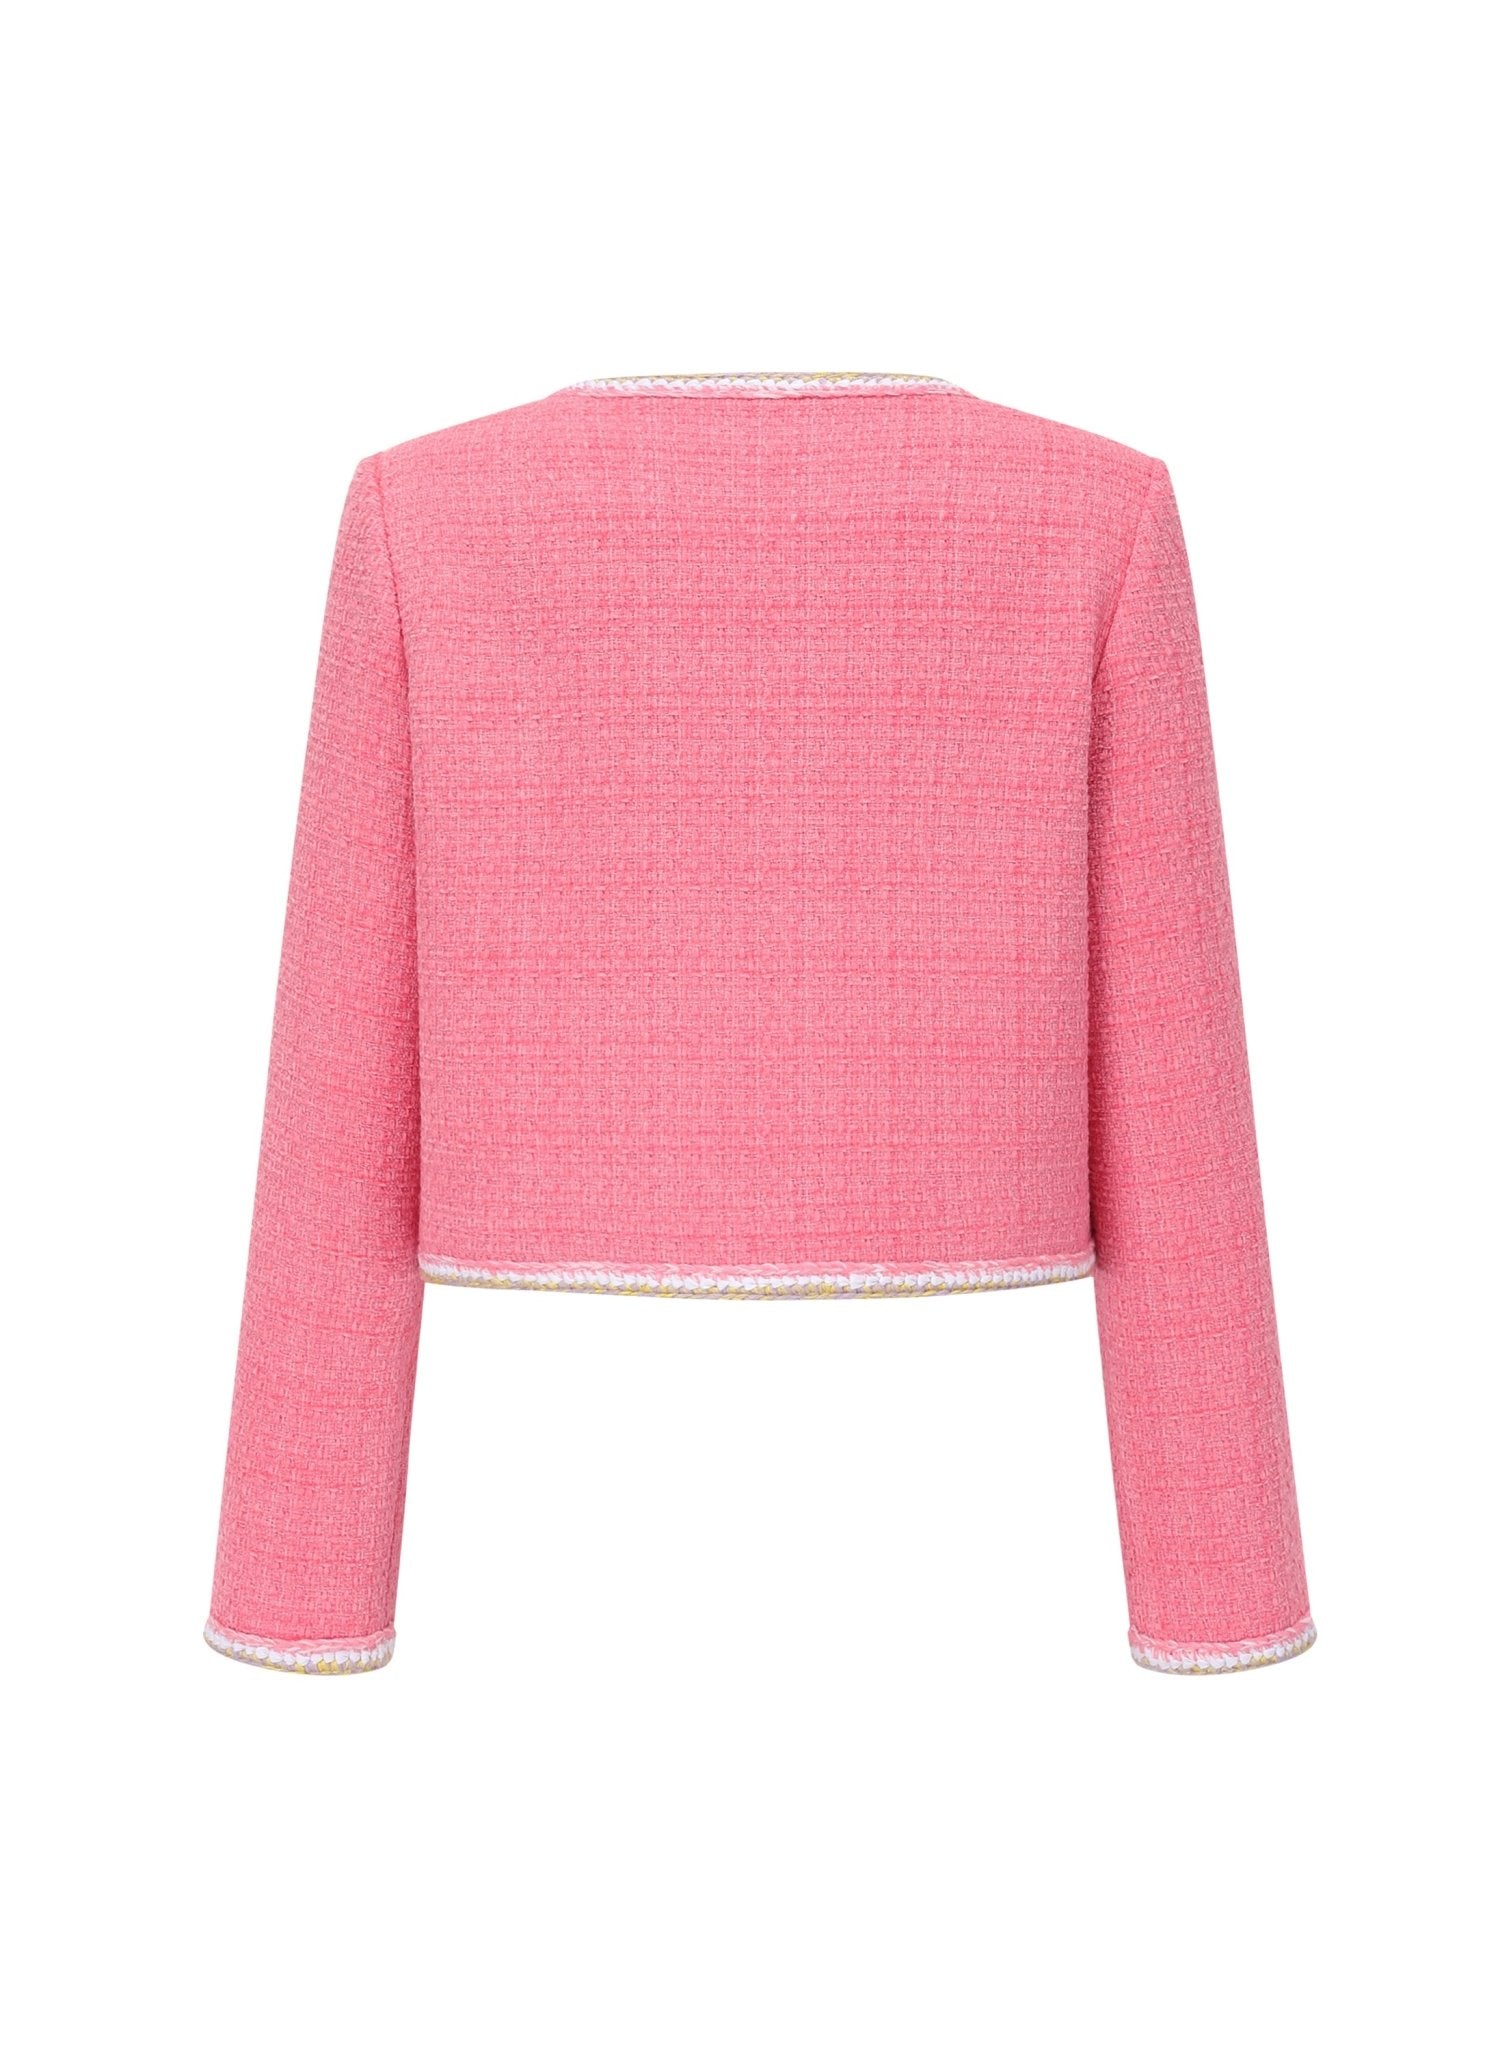 Alexia Sandra Pink Heart Buttoned Tweed Jacket | MADA IN CHINA